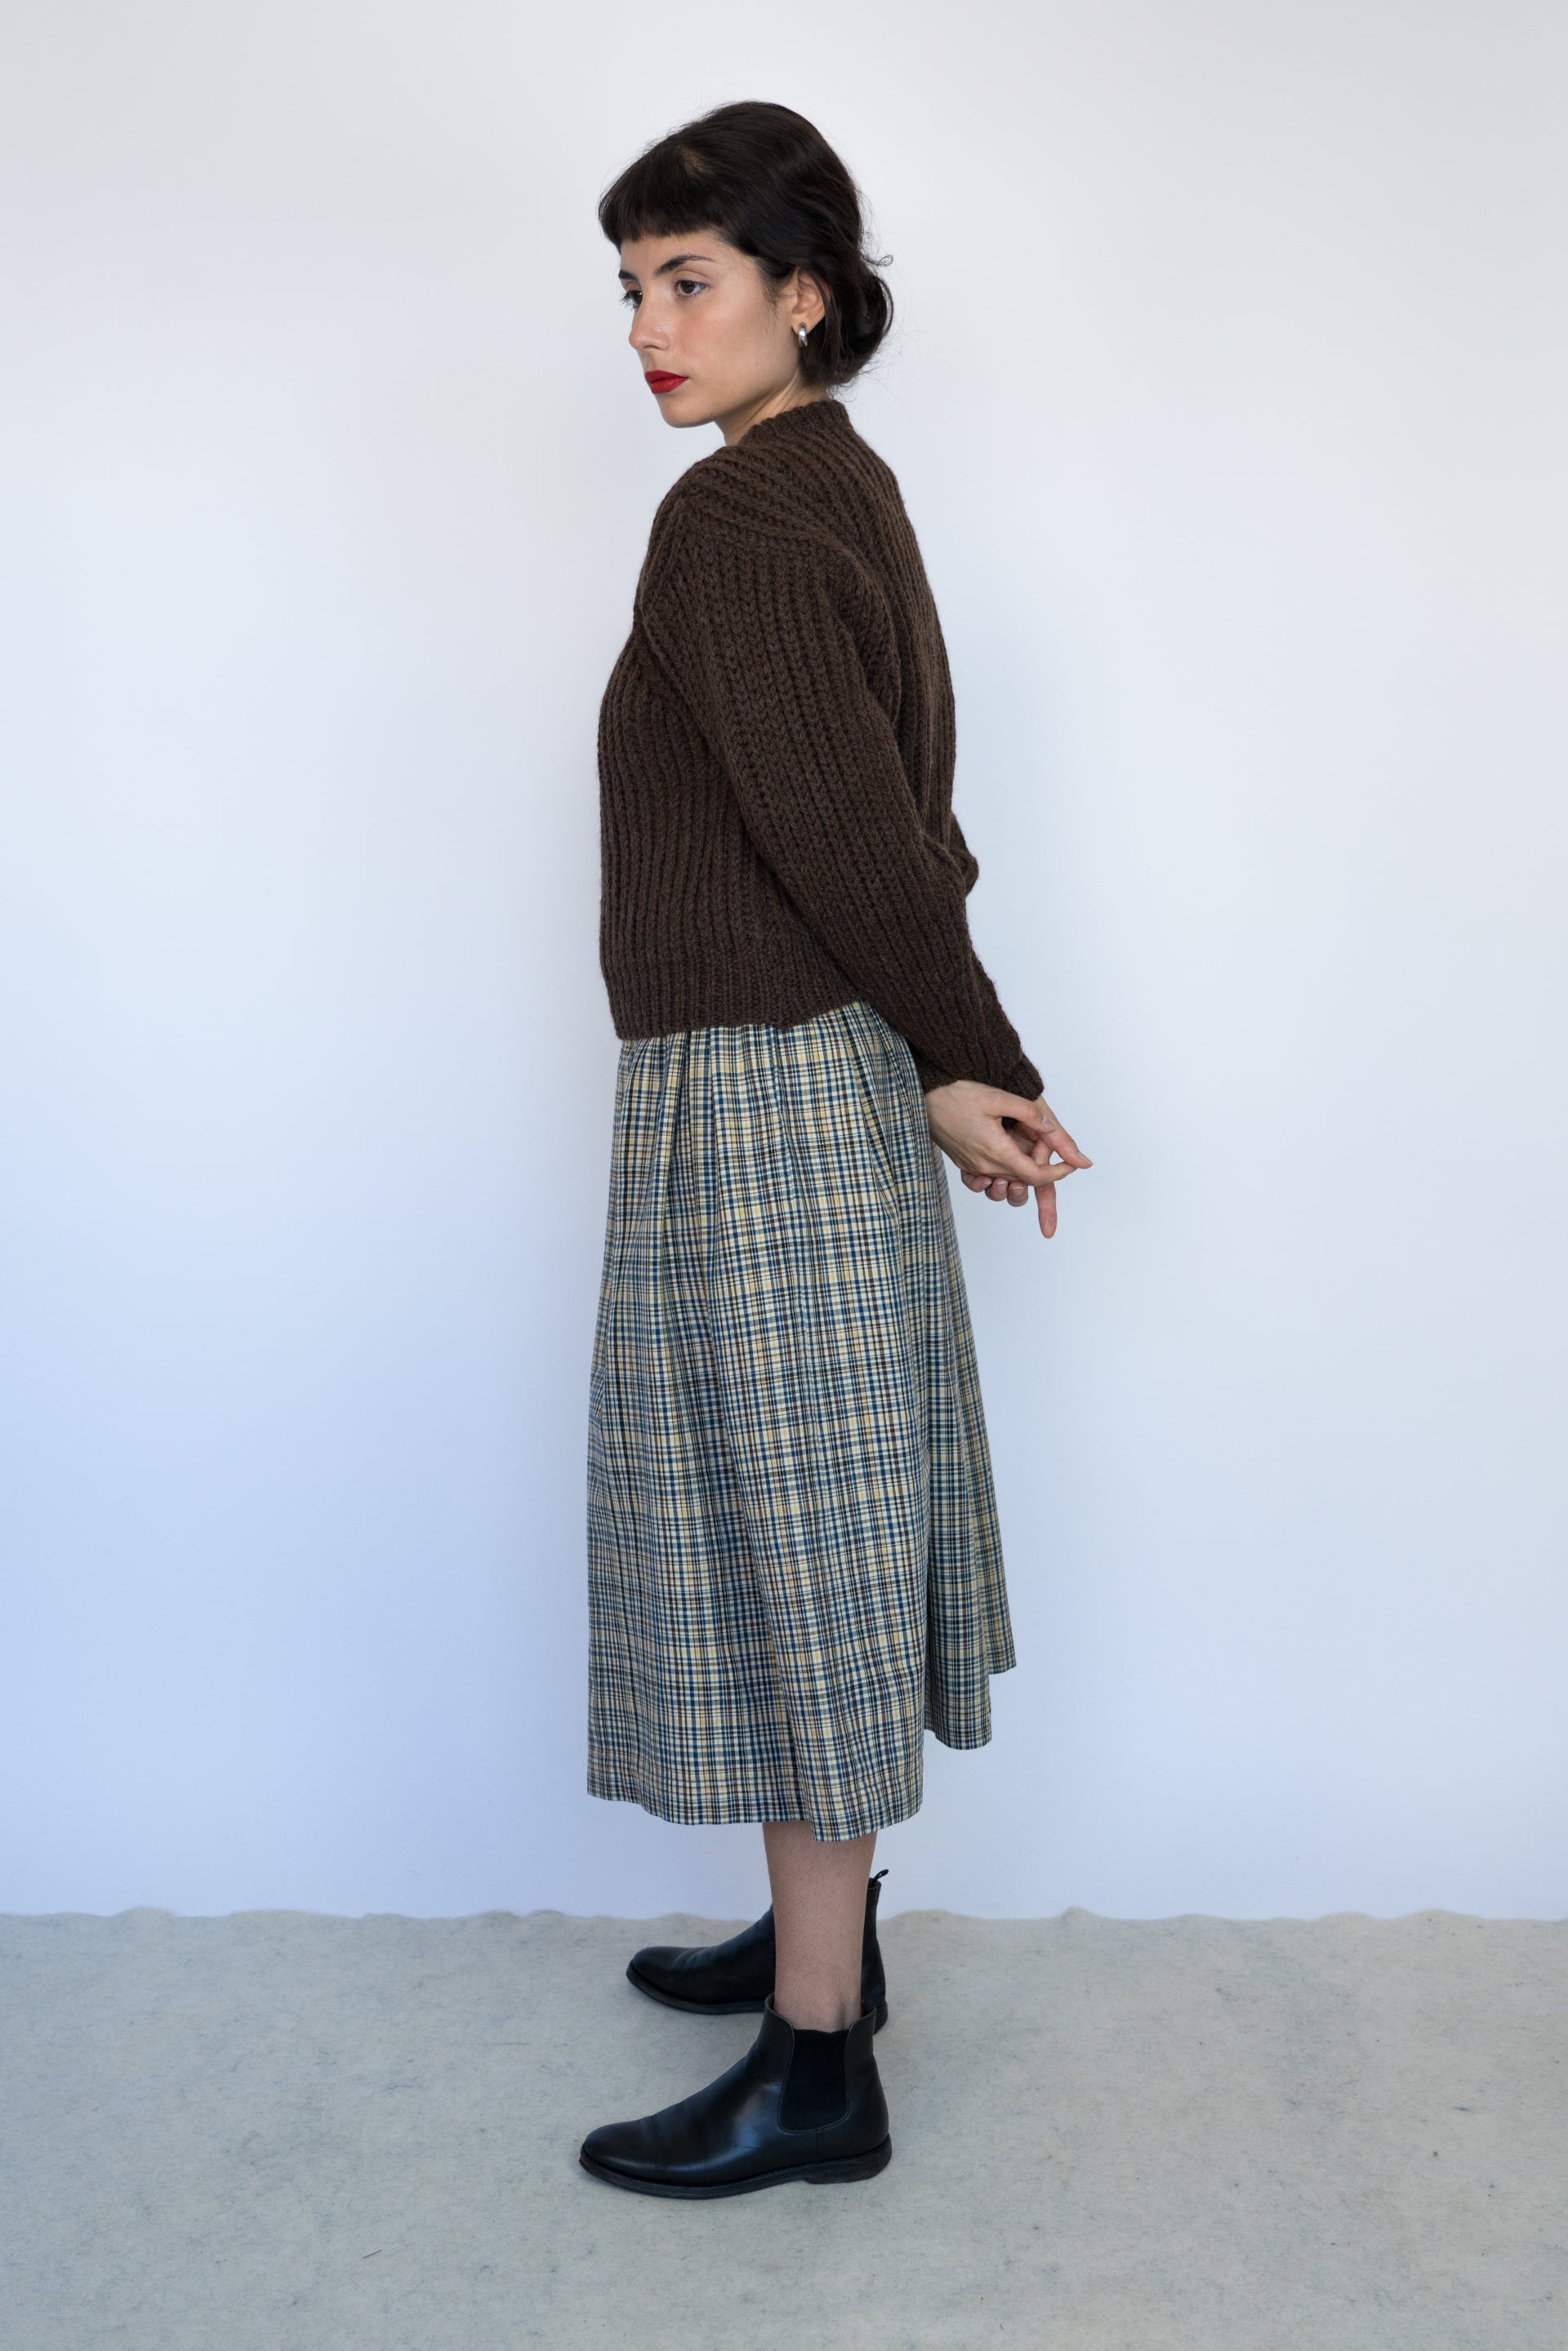 UNDYED, WOOL, HAND-KNITTED, JUMPER, SWEATER, FISHERMAN RIBB, STYLISH, SUSTAINABLE, HAND-CRAFTED, WOMENSWEAR